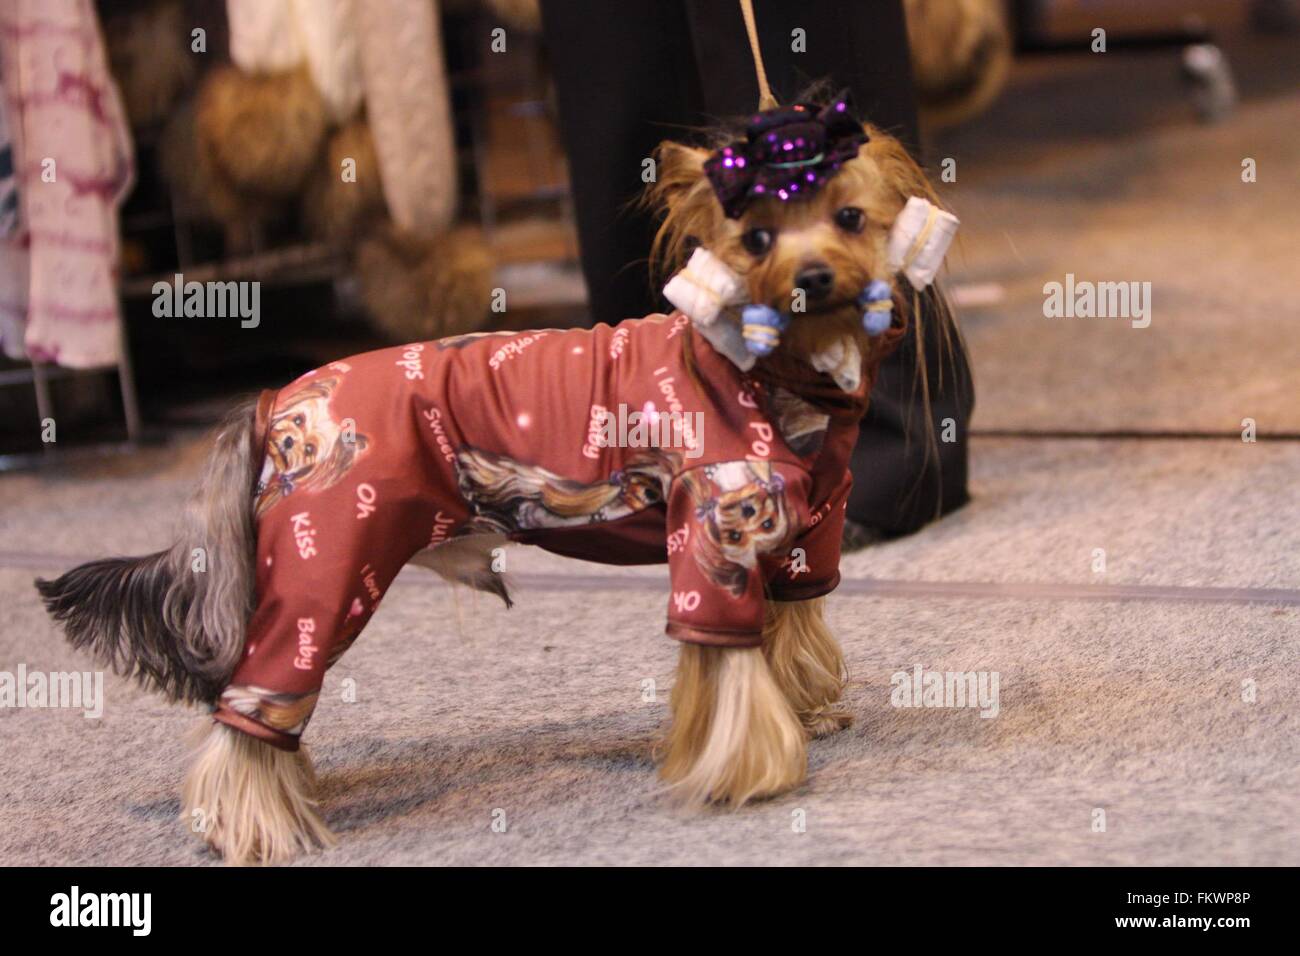 Birmingham, UK. 10th March, 2016. A Yorkshire Terrier dressed for success at Crufts. Credit: Jon Freeman/Alamy Live News Stock Photo